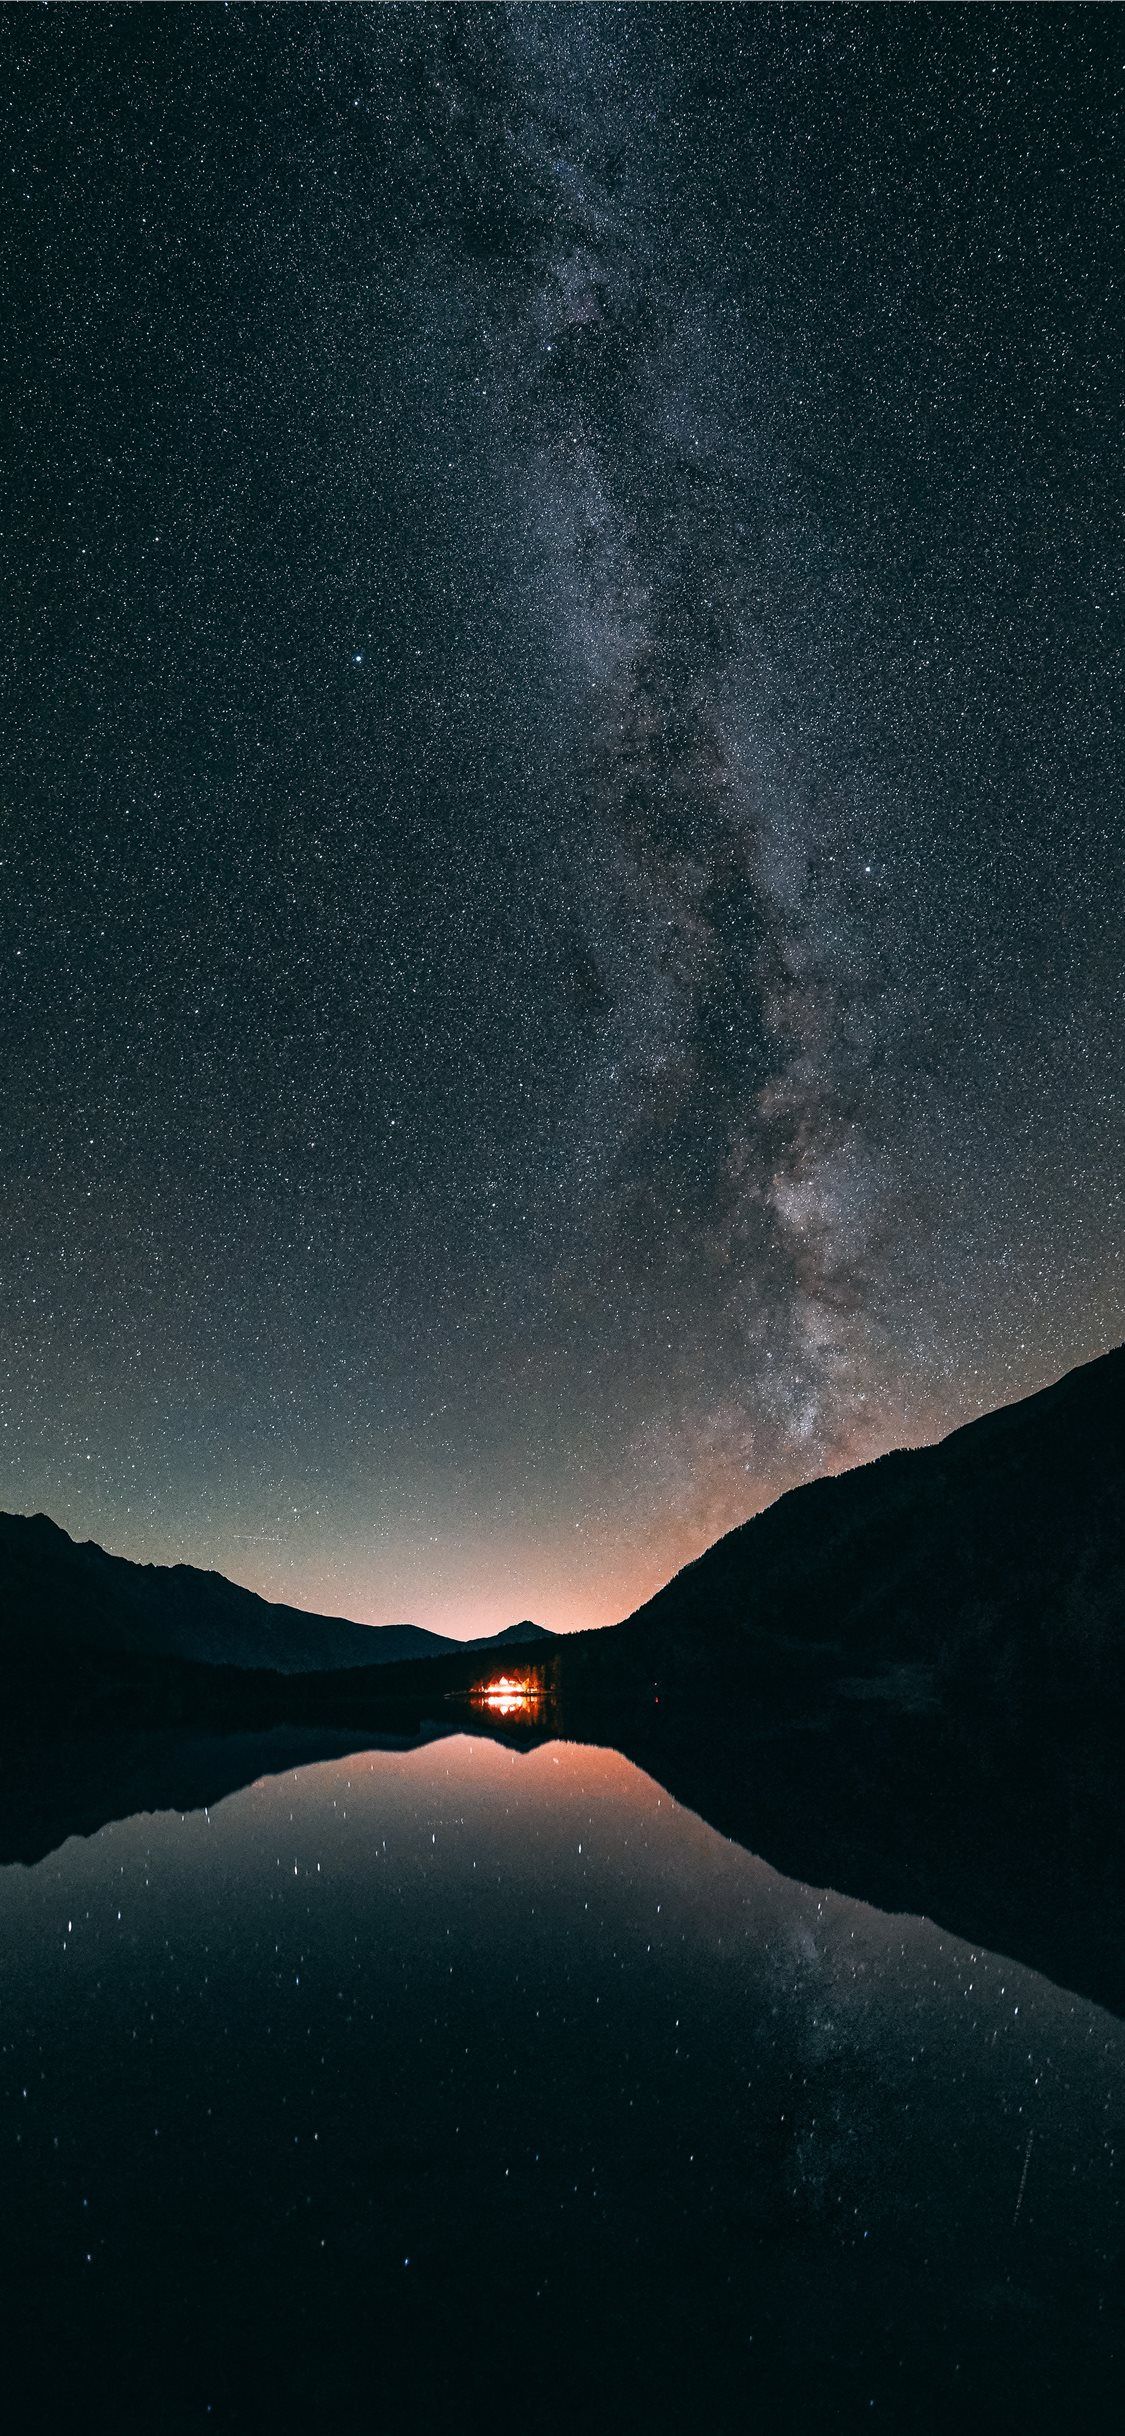 The Milky Way Antholz Lake Wallpaper Beaty Your